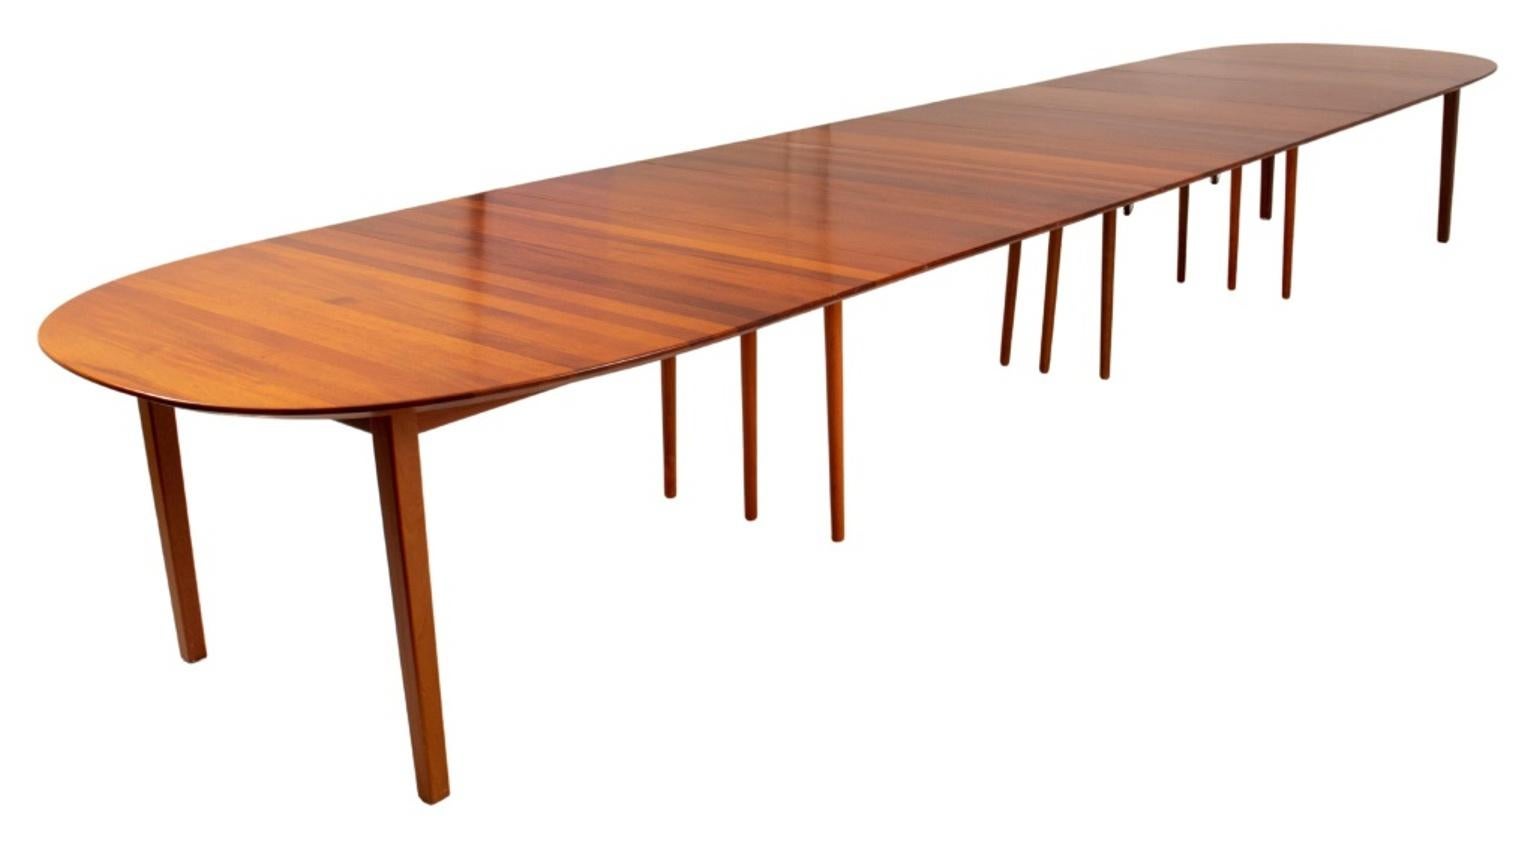 Danish Modern black cherry wood extending dining table, oval above tapering square legs, with eight (8) additional leaves and eighteen (18) tapering columnar support legs, possibly after a model by Ole Hald for Gudme Mobelfabrik, Denmark. 28.5